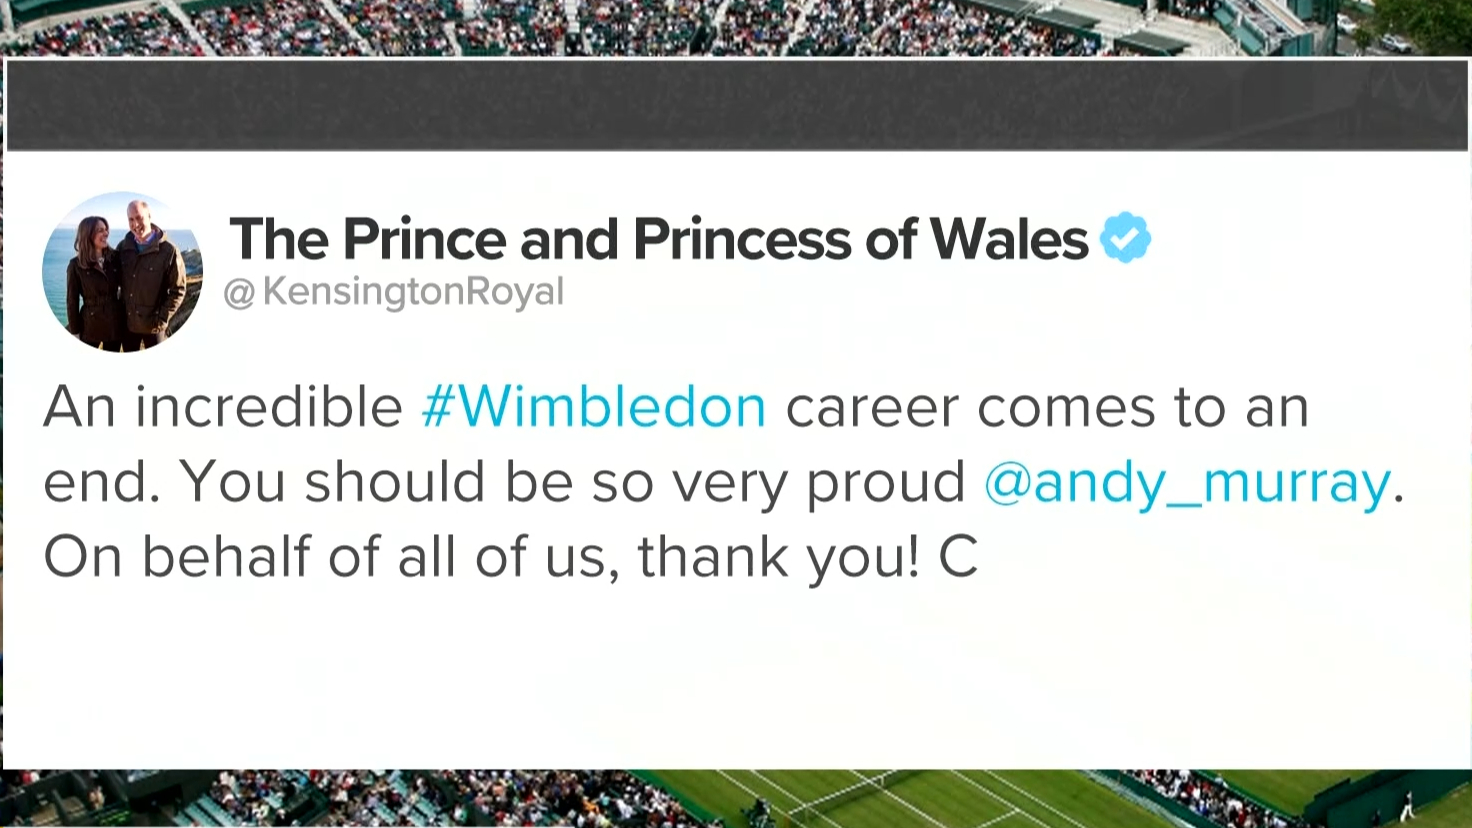 Princess of Wales pays tribute to Murray